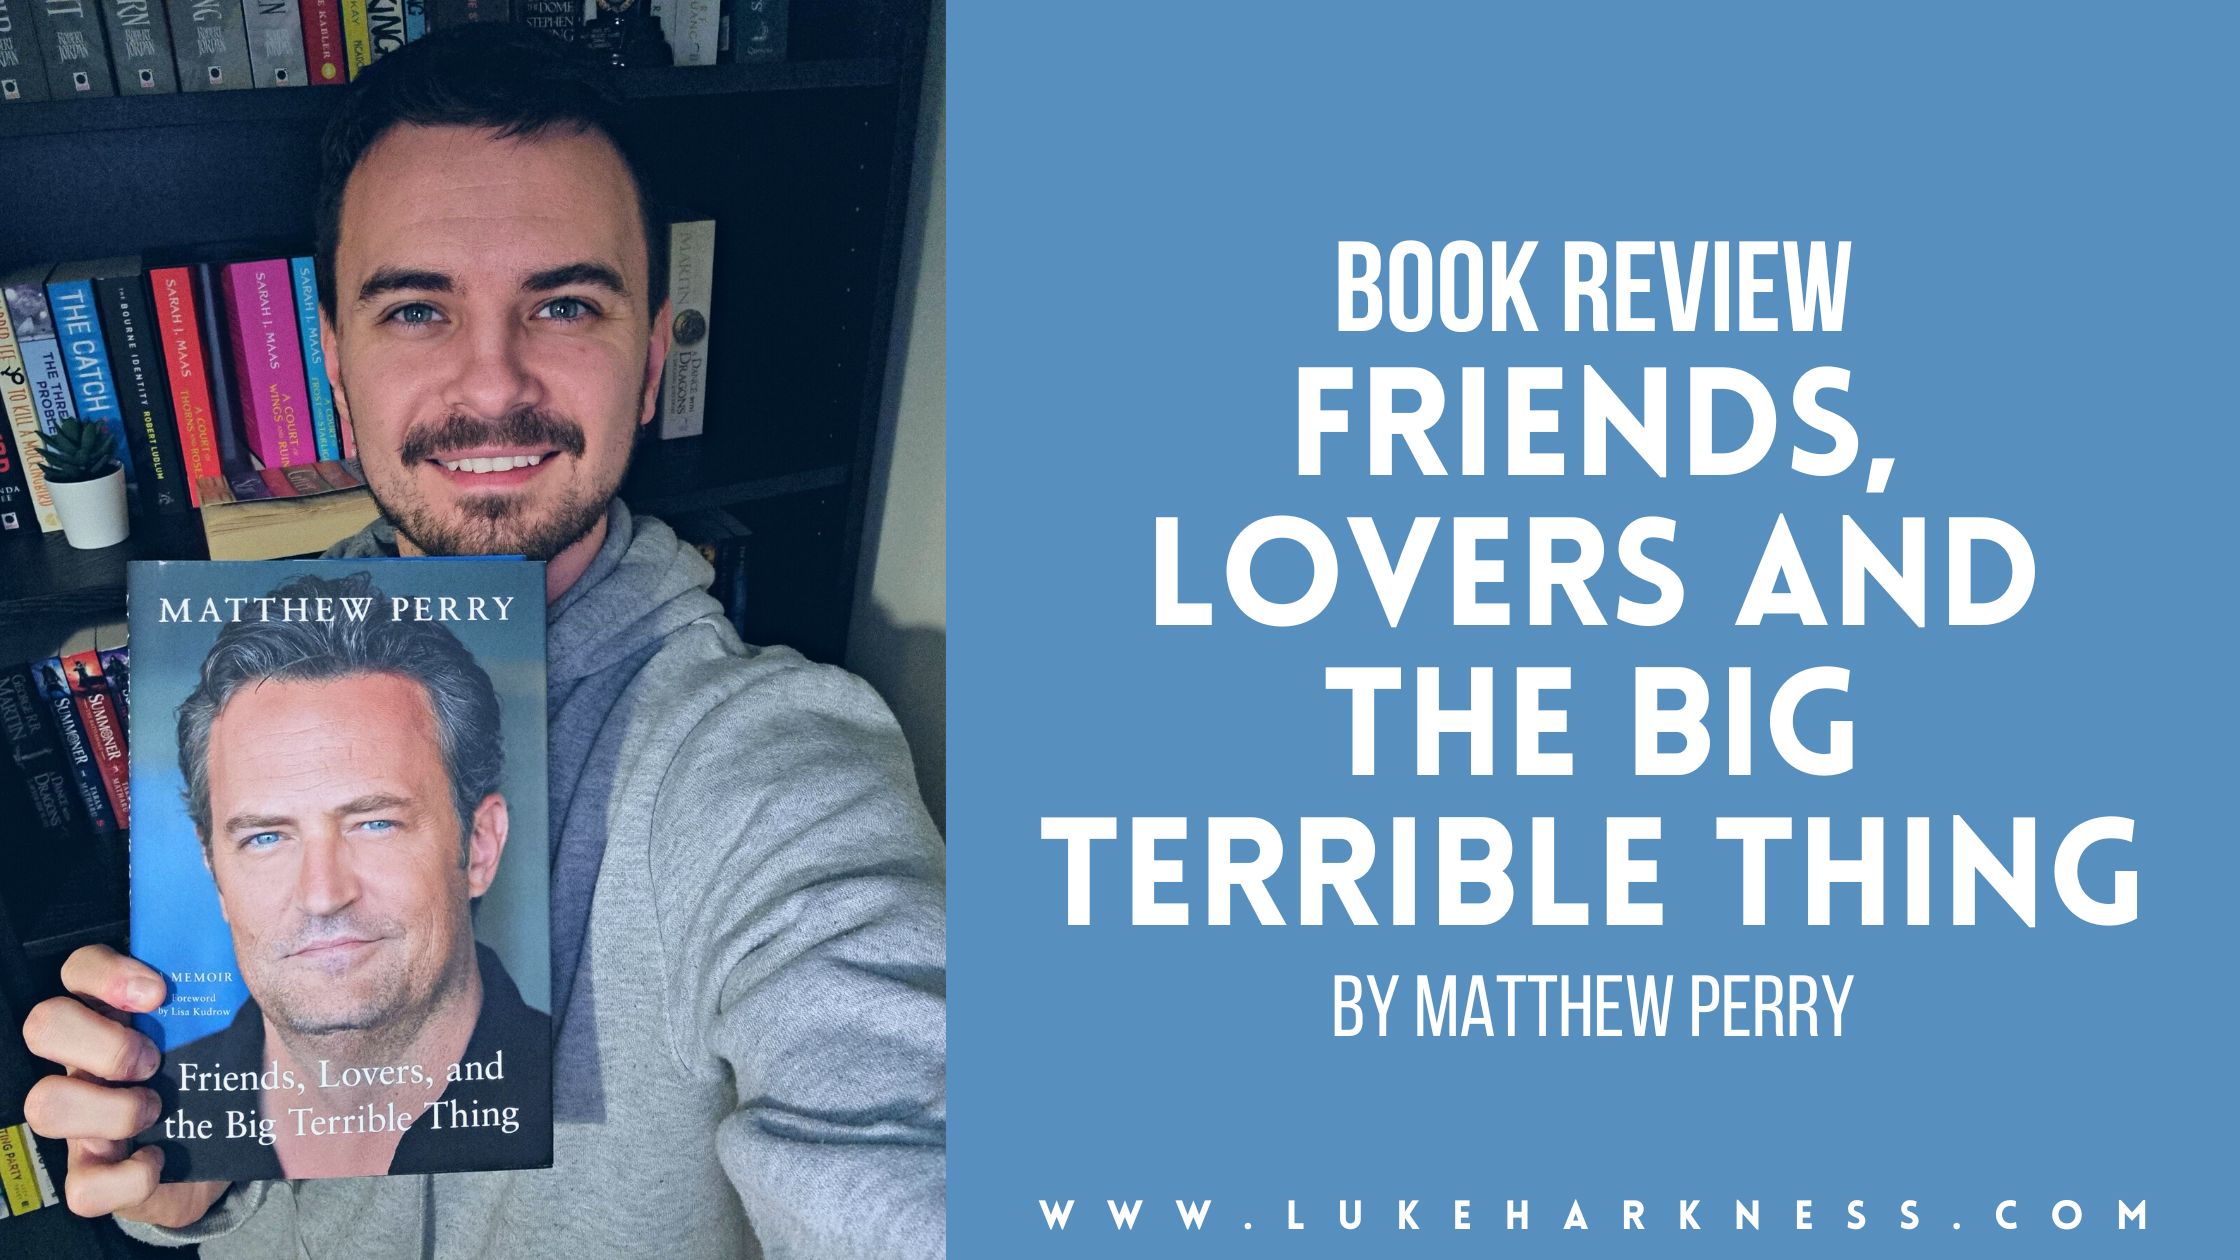 Book review of Matthew Perry memoir Friends, Lovers and the Big